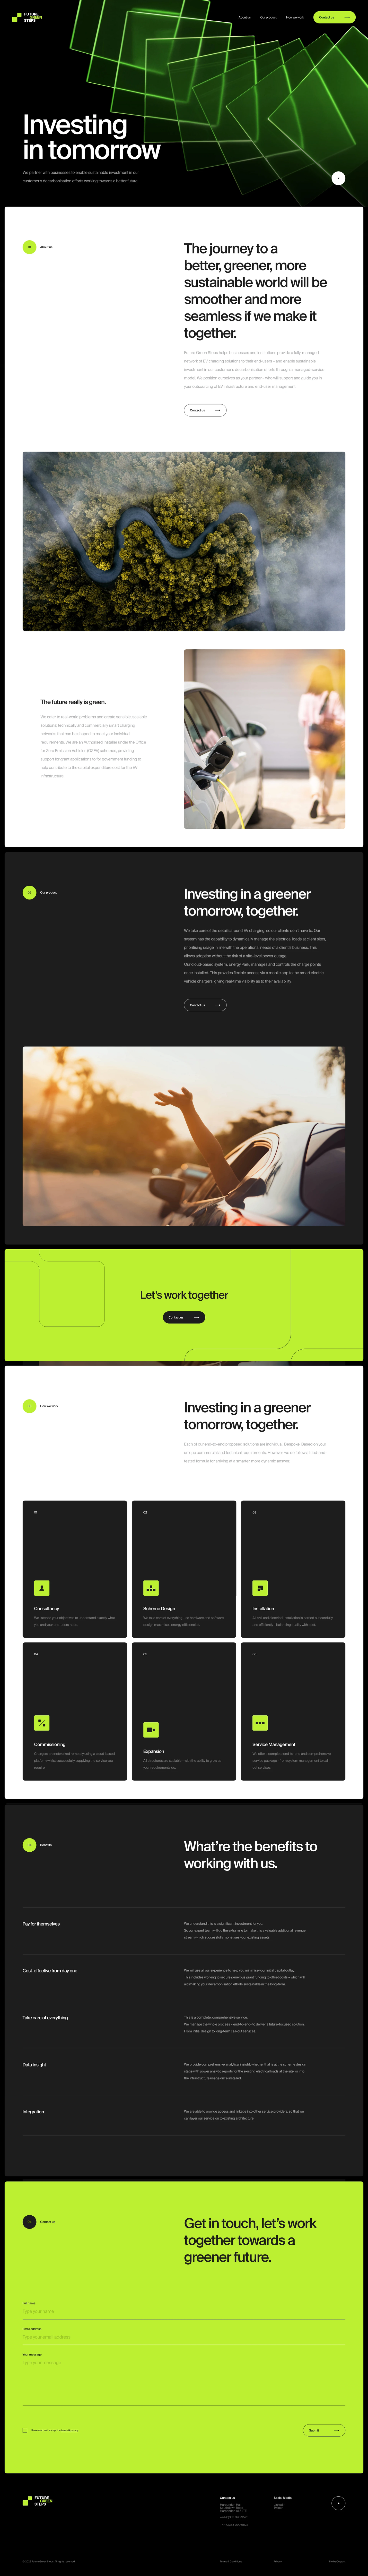 Future Green Steps Landing Page Example: We partner with businesses to enable sustainable investment in our customer’s decarbonisation efforts working towards a better future.